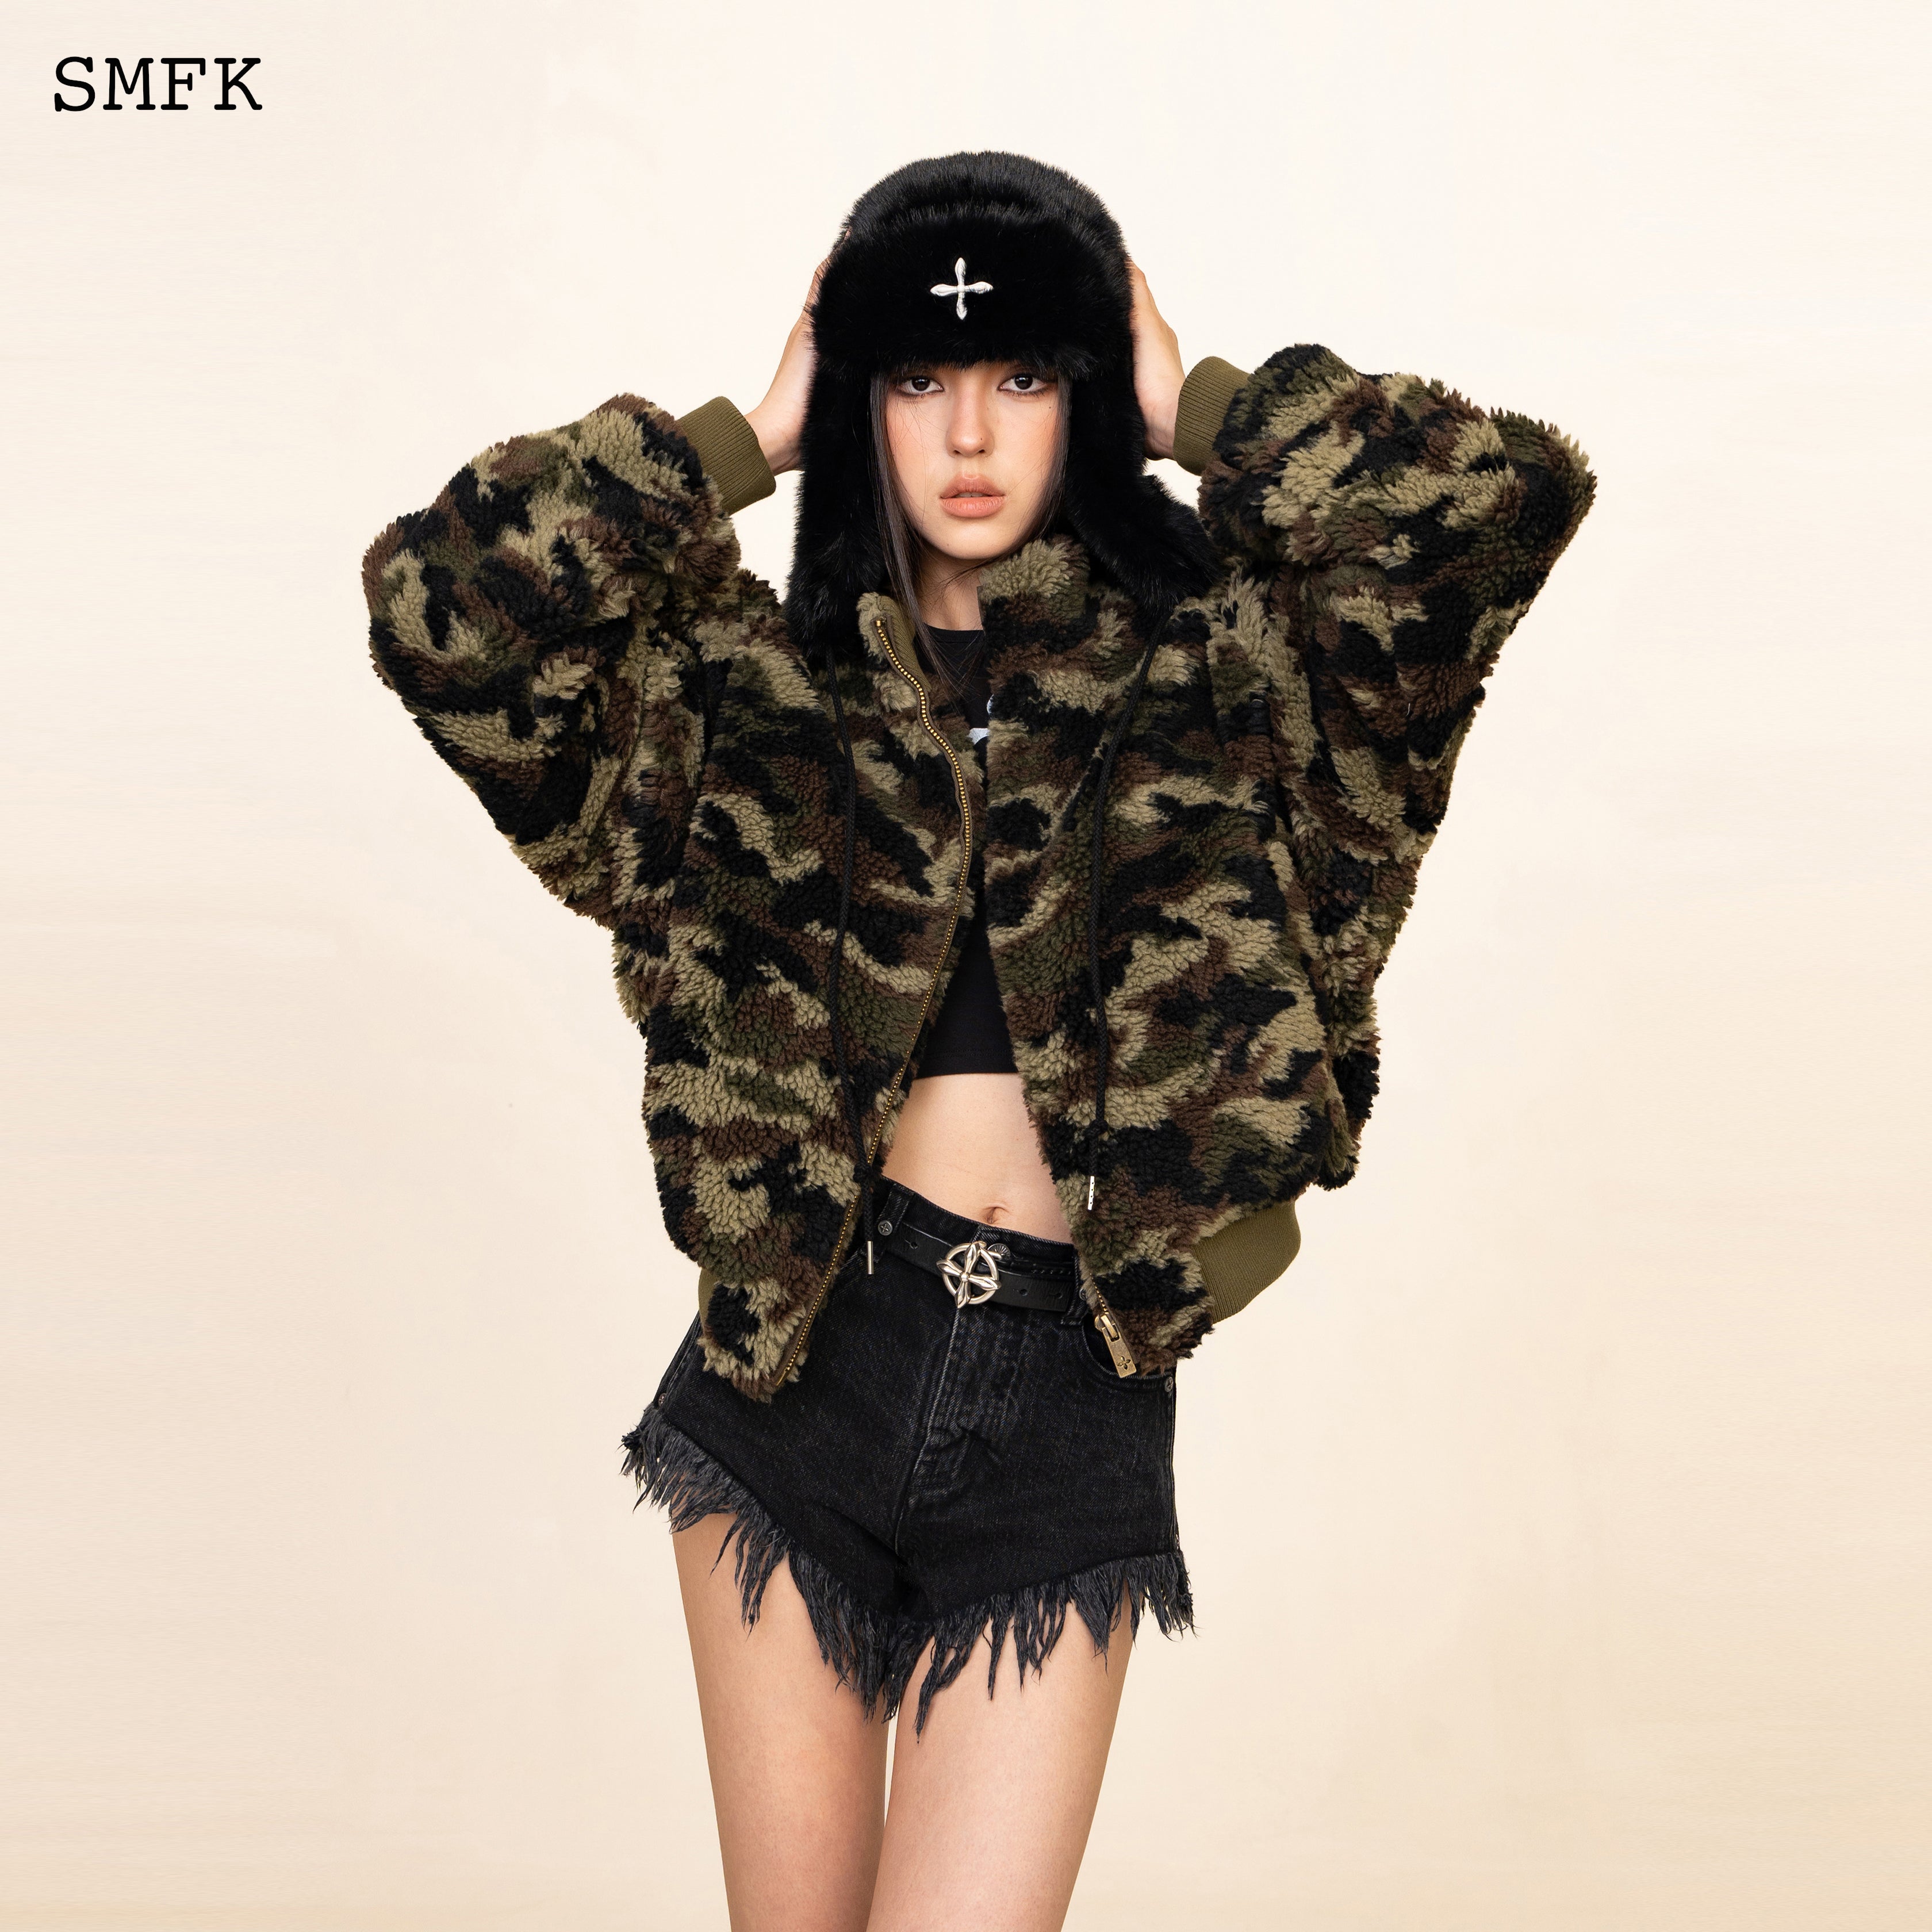 Compass Cross Winter Faux Fur Hat In Black | SMFK Official